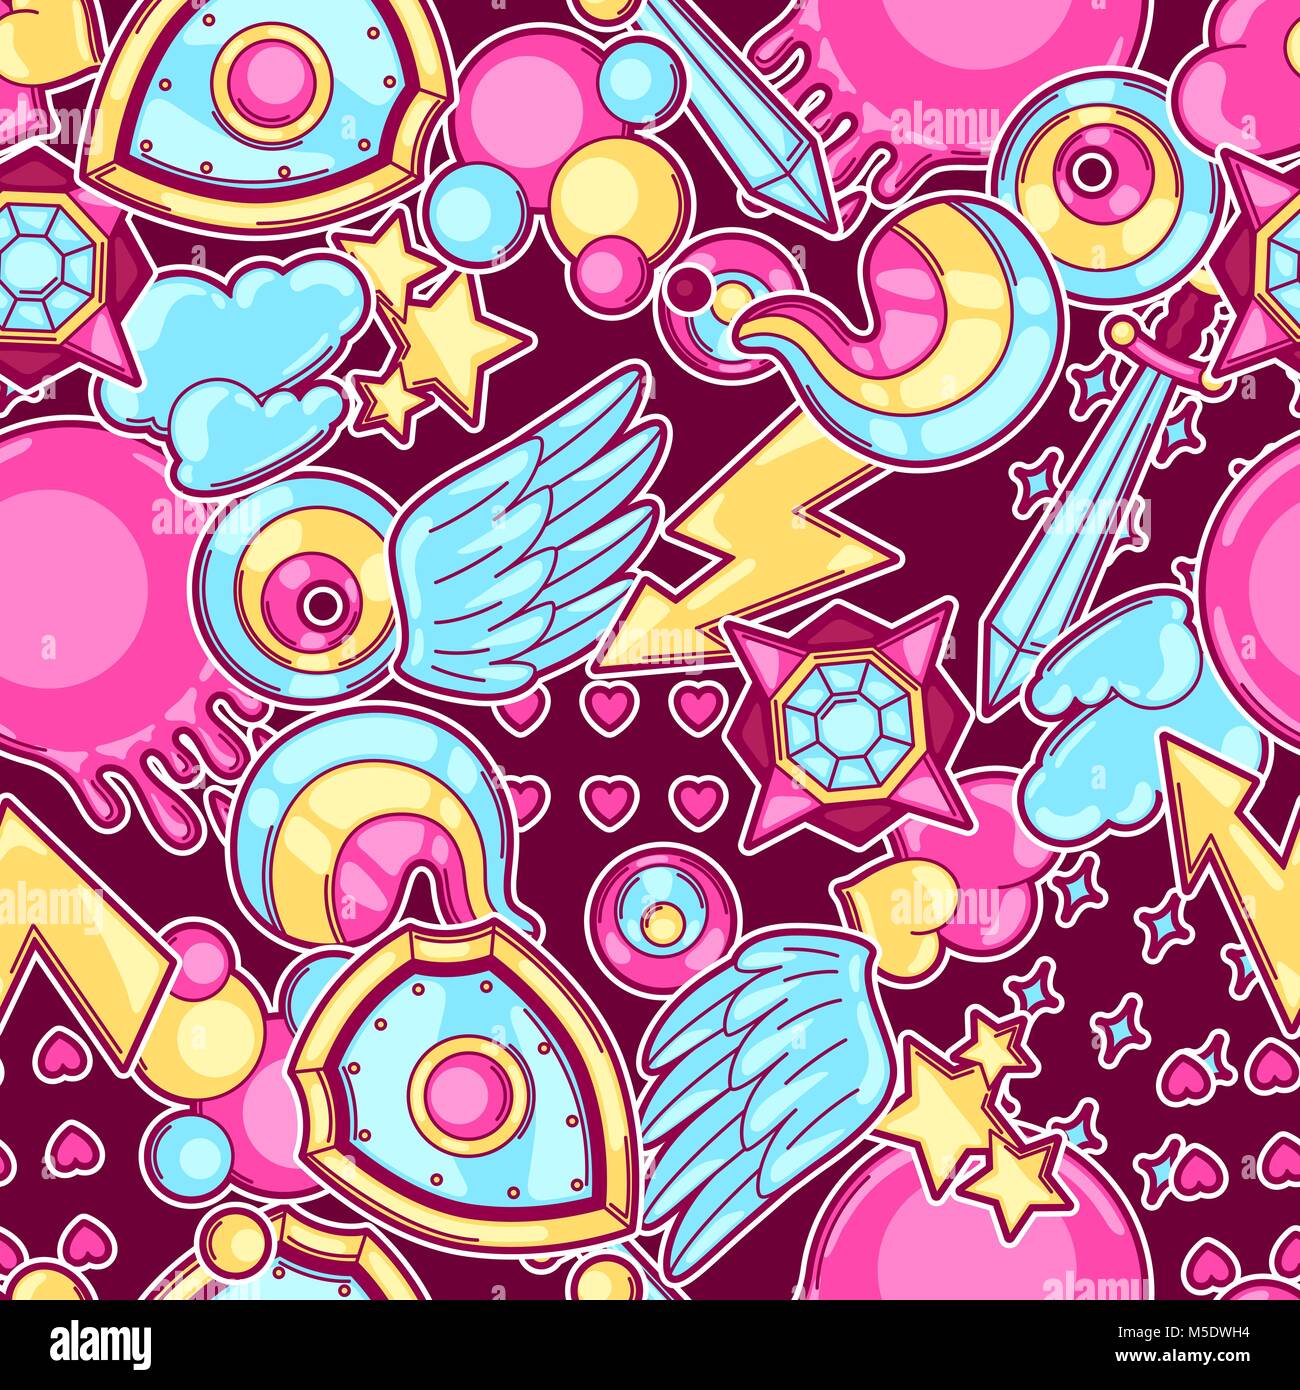 Seamless pattern with cartoon fantasy objects. Fashion symbols in comic style Stock Vector